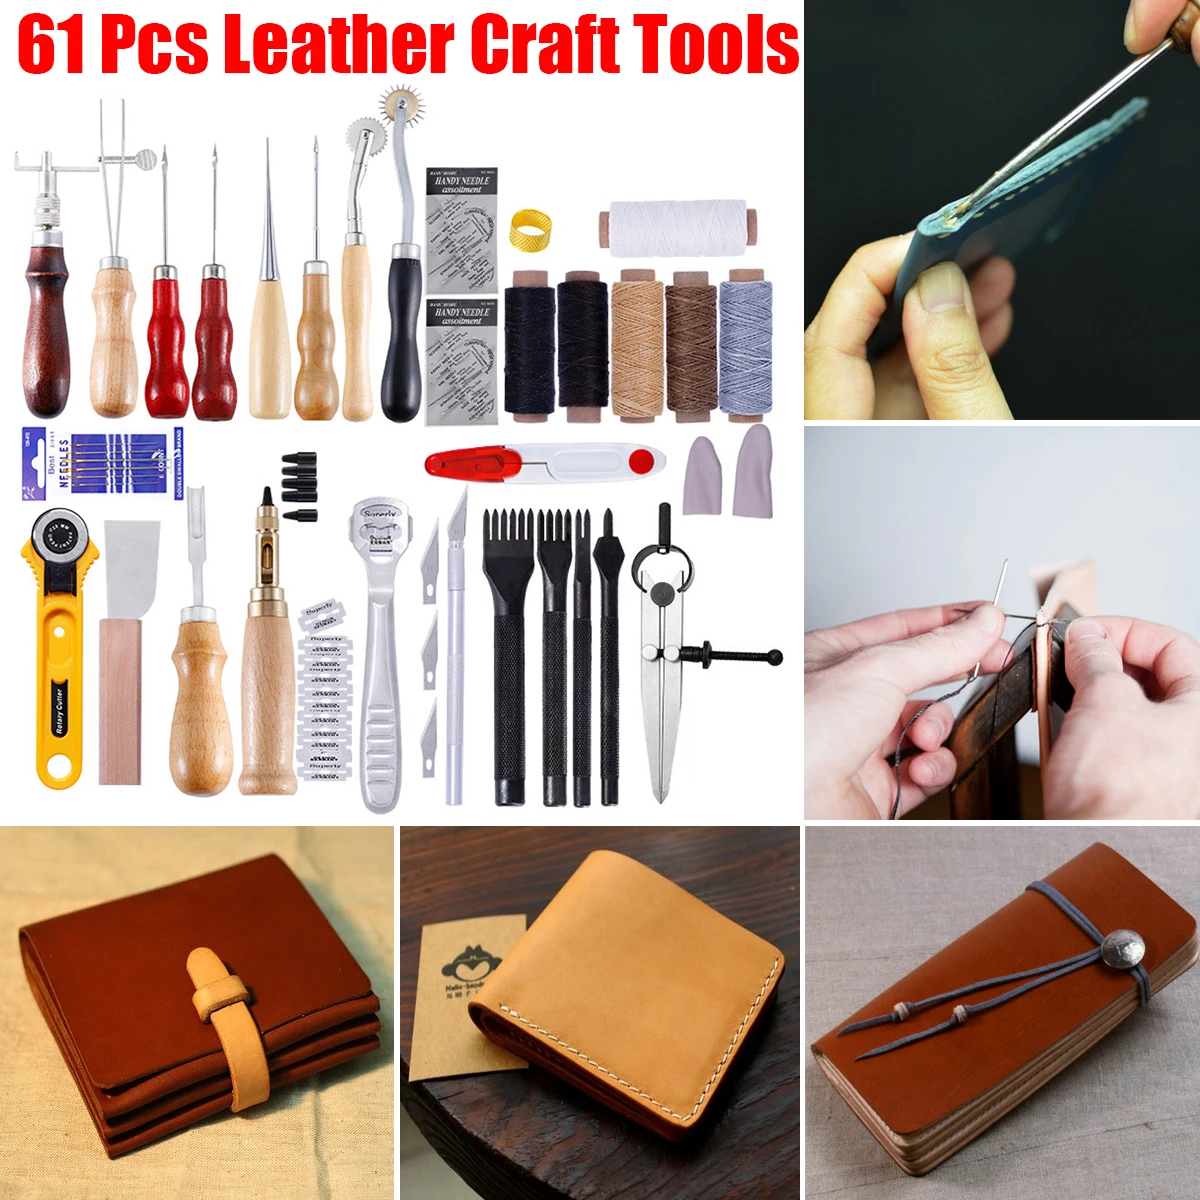 61 PCs Leather Craft Sewing Punch  Cutter Carving Working Stitching Tool Kit 